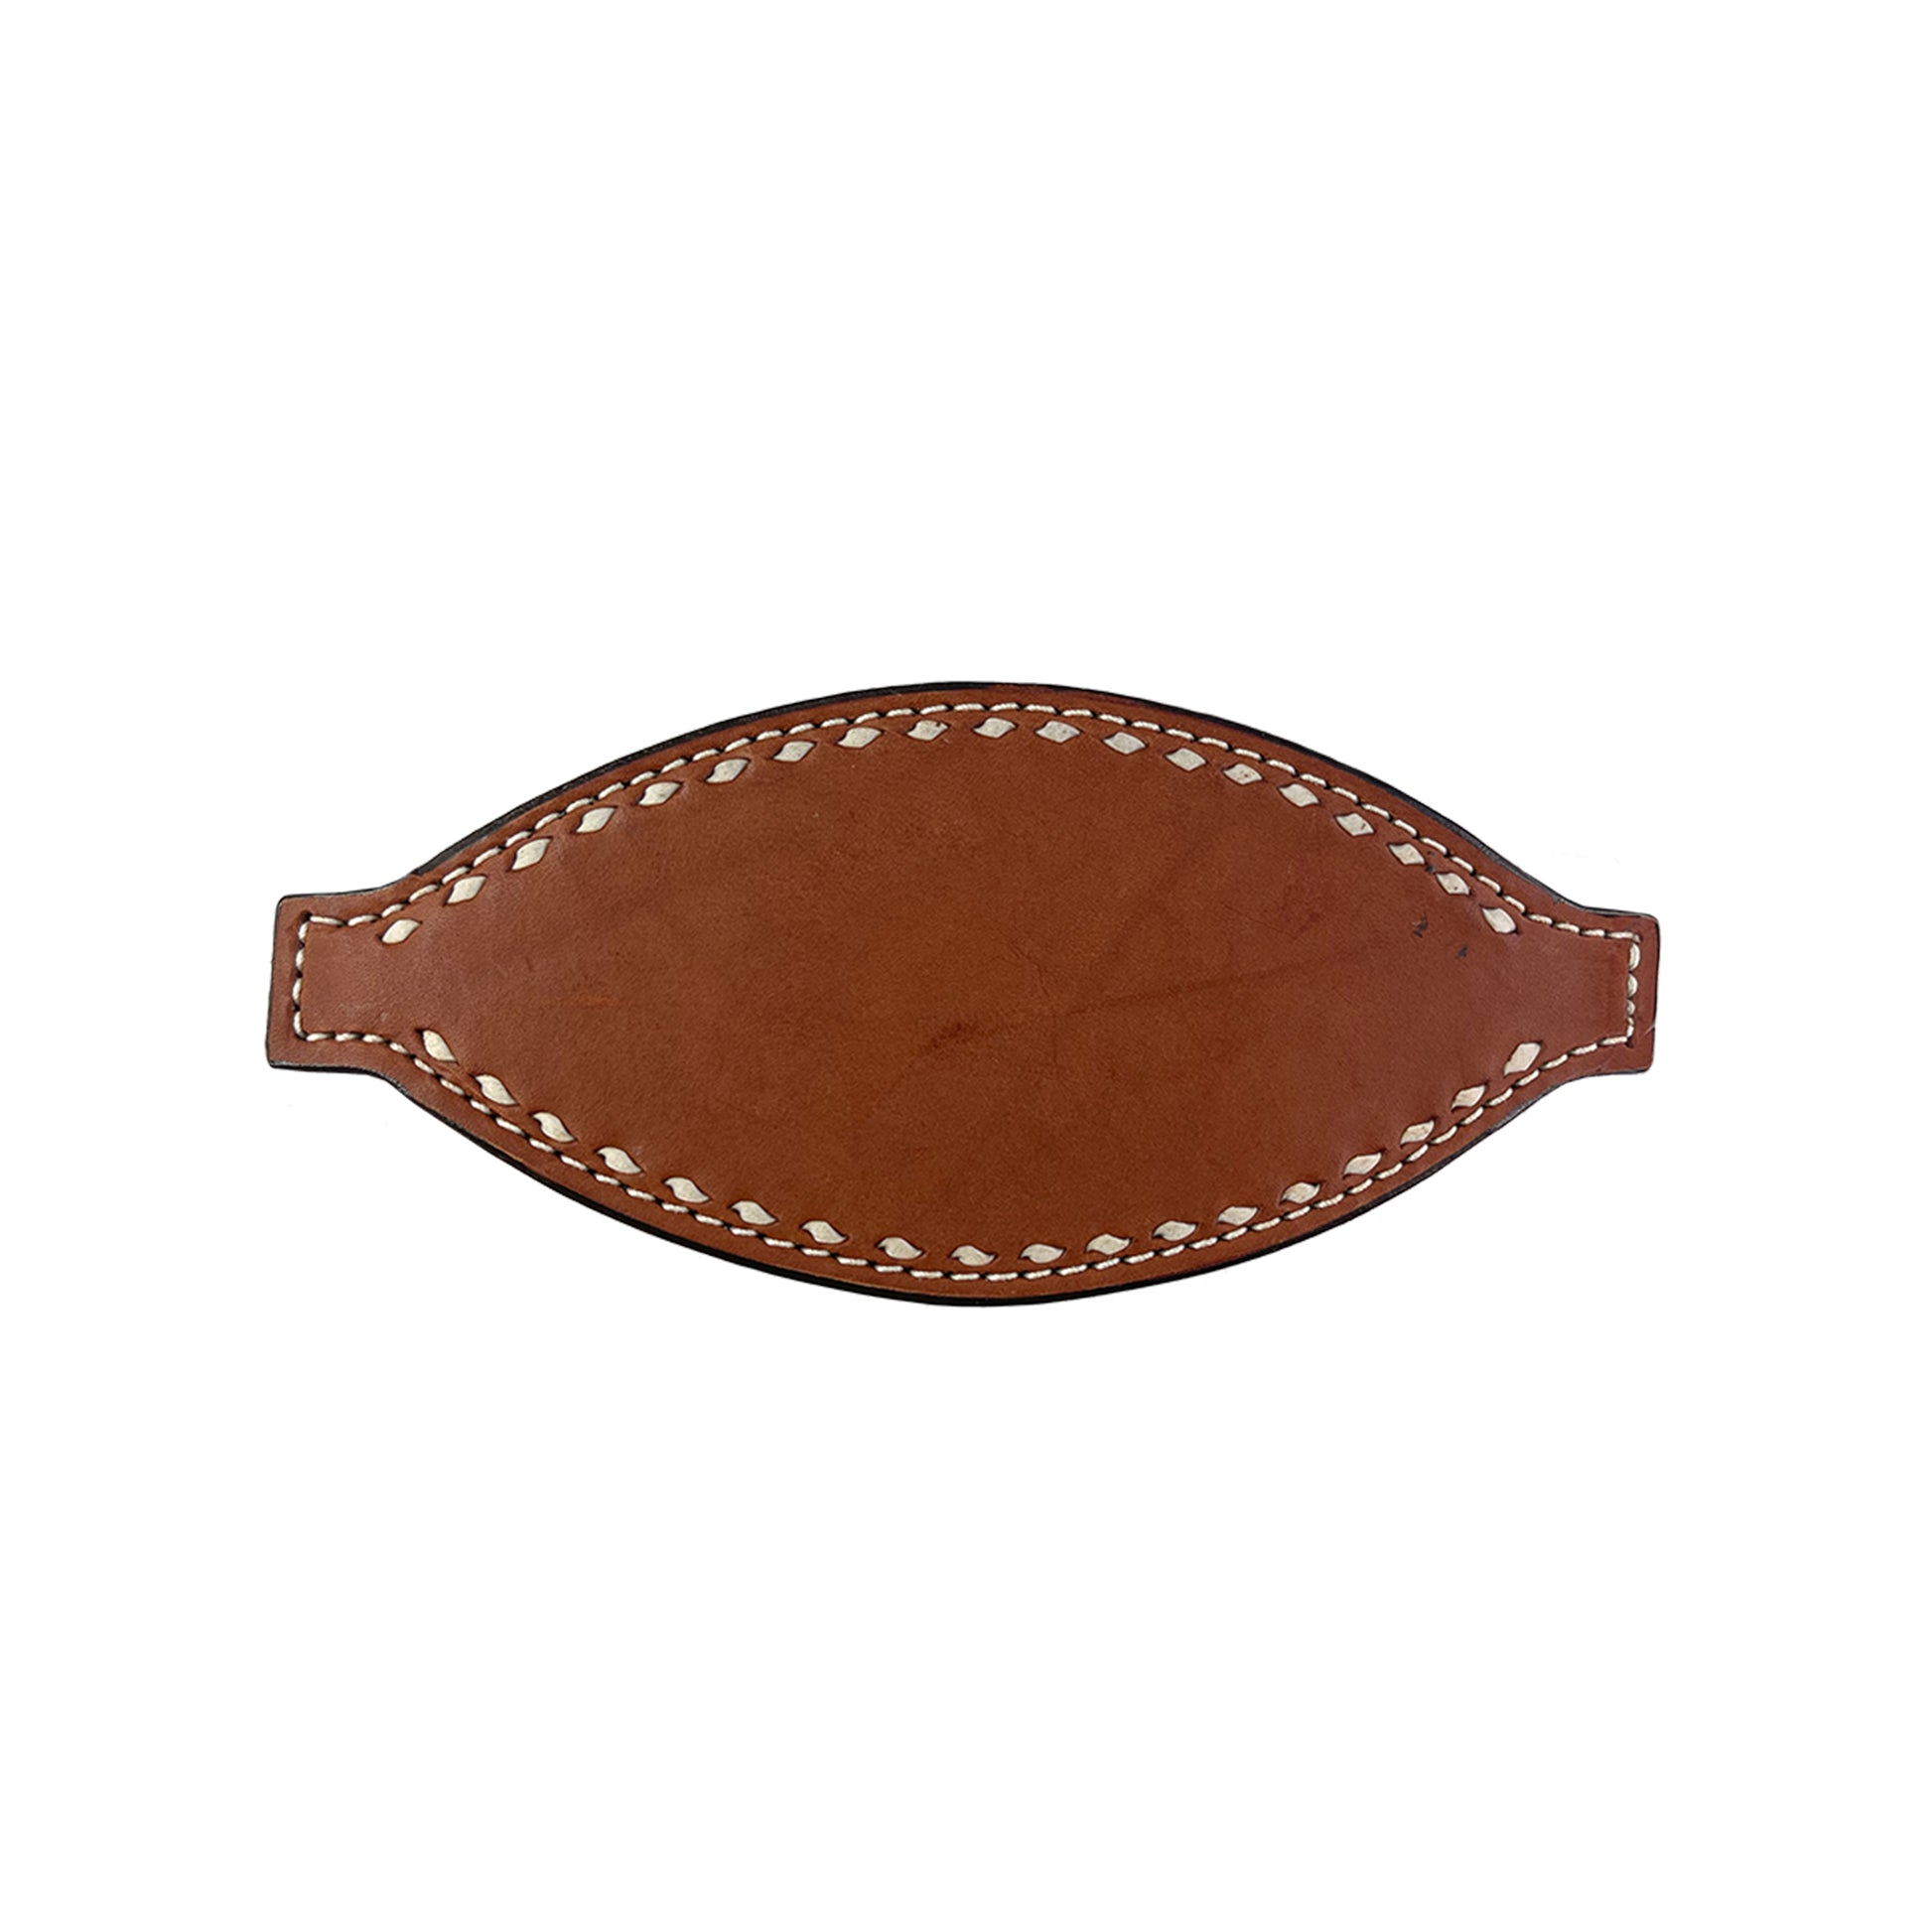 Bronc nose rough out toast leather with rawhide buckstitch.